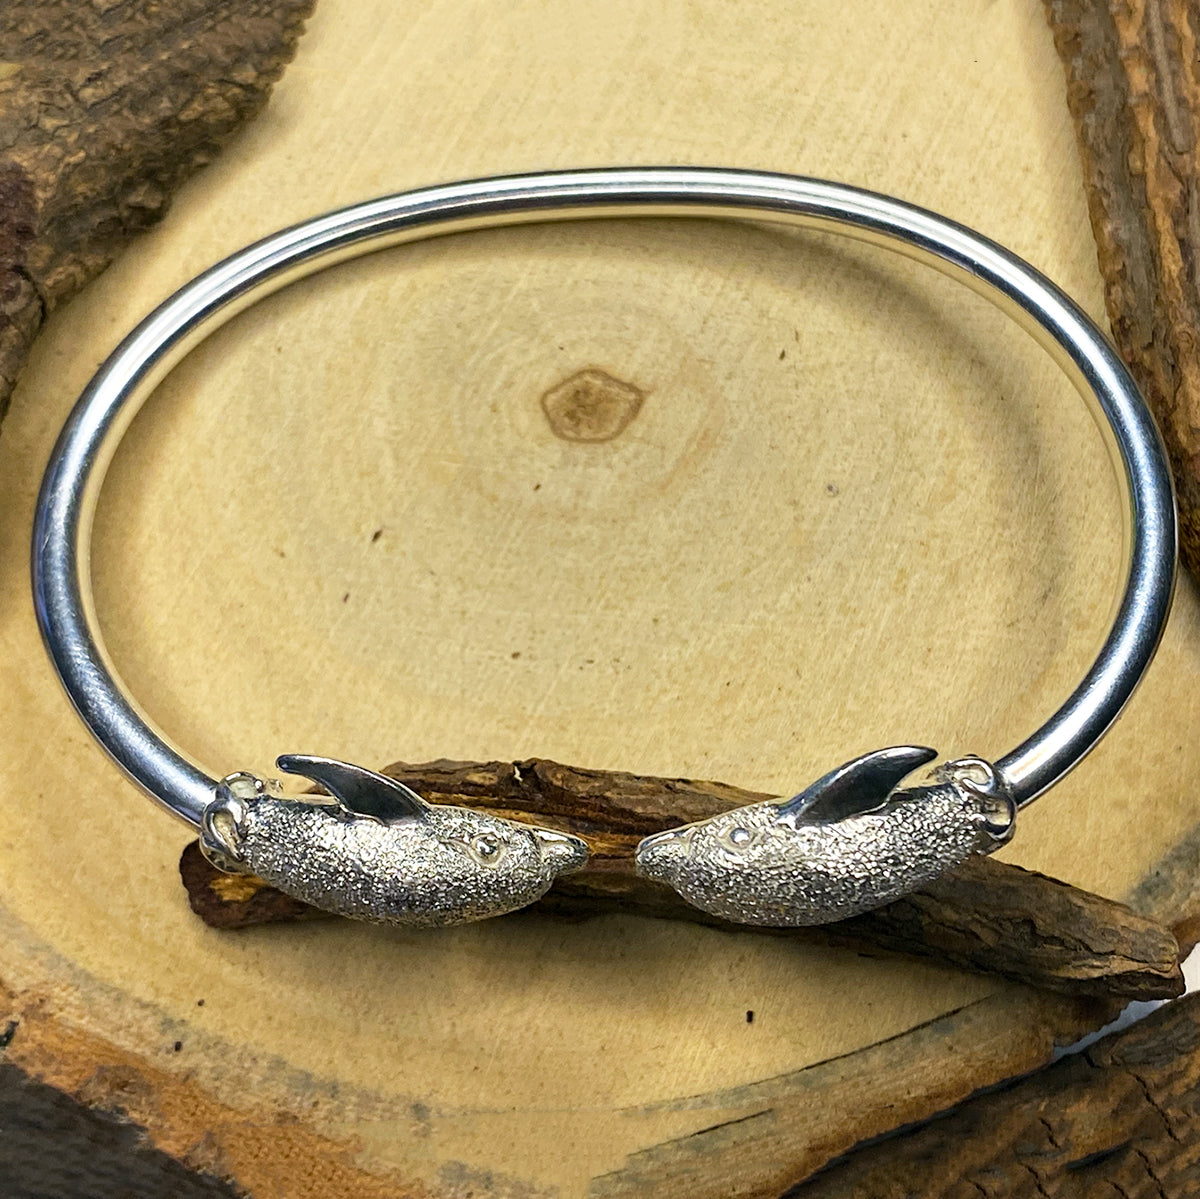 Great Lakes Boutique Silver Dolphin Bangle